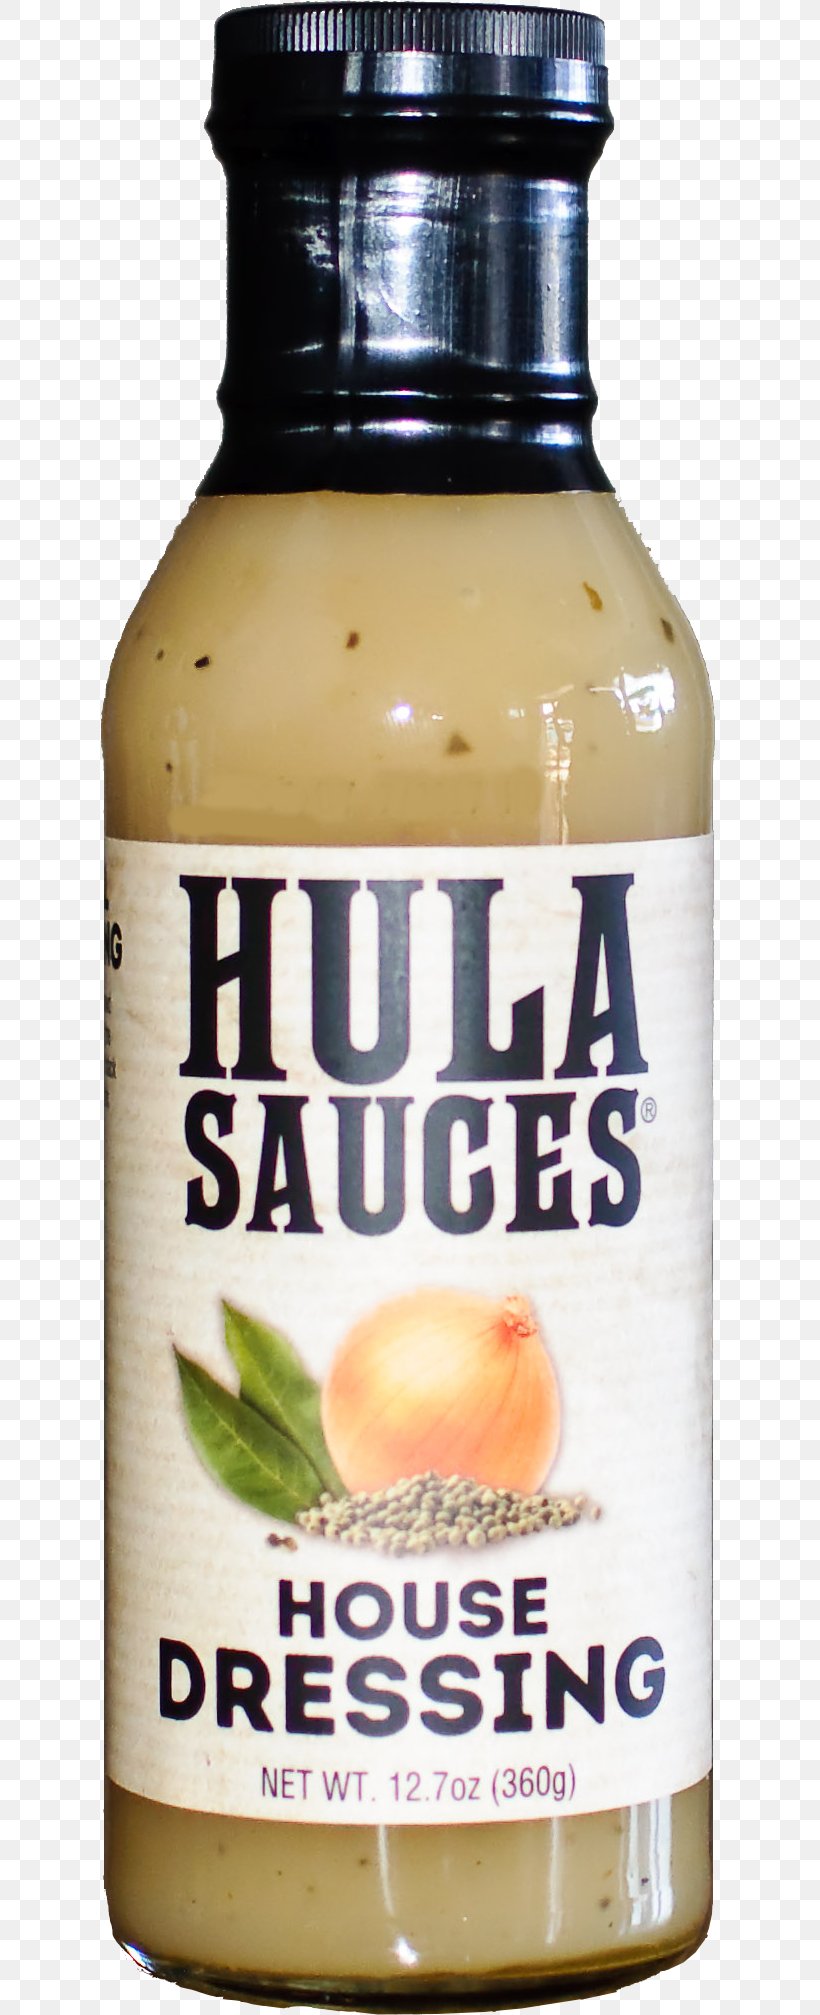 Hula Restaurant And Sauce Co. Cuisine Of Hawaii Boardwalk, PNG, 623x2015px, Cuisine Of Hawaii, Boardwalk, City, Condiment, Flavor Download Free